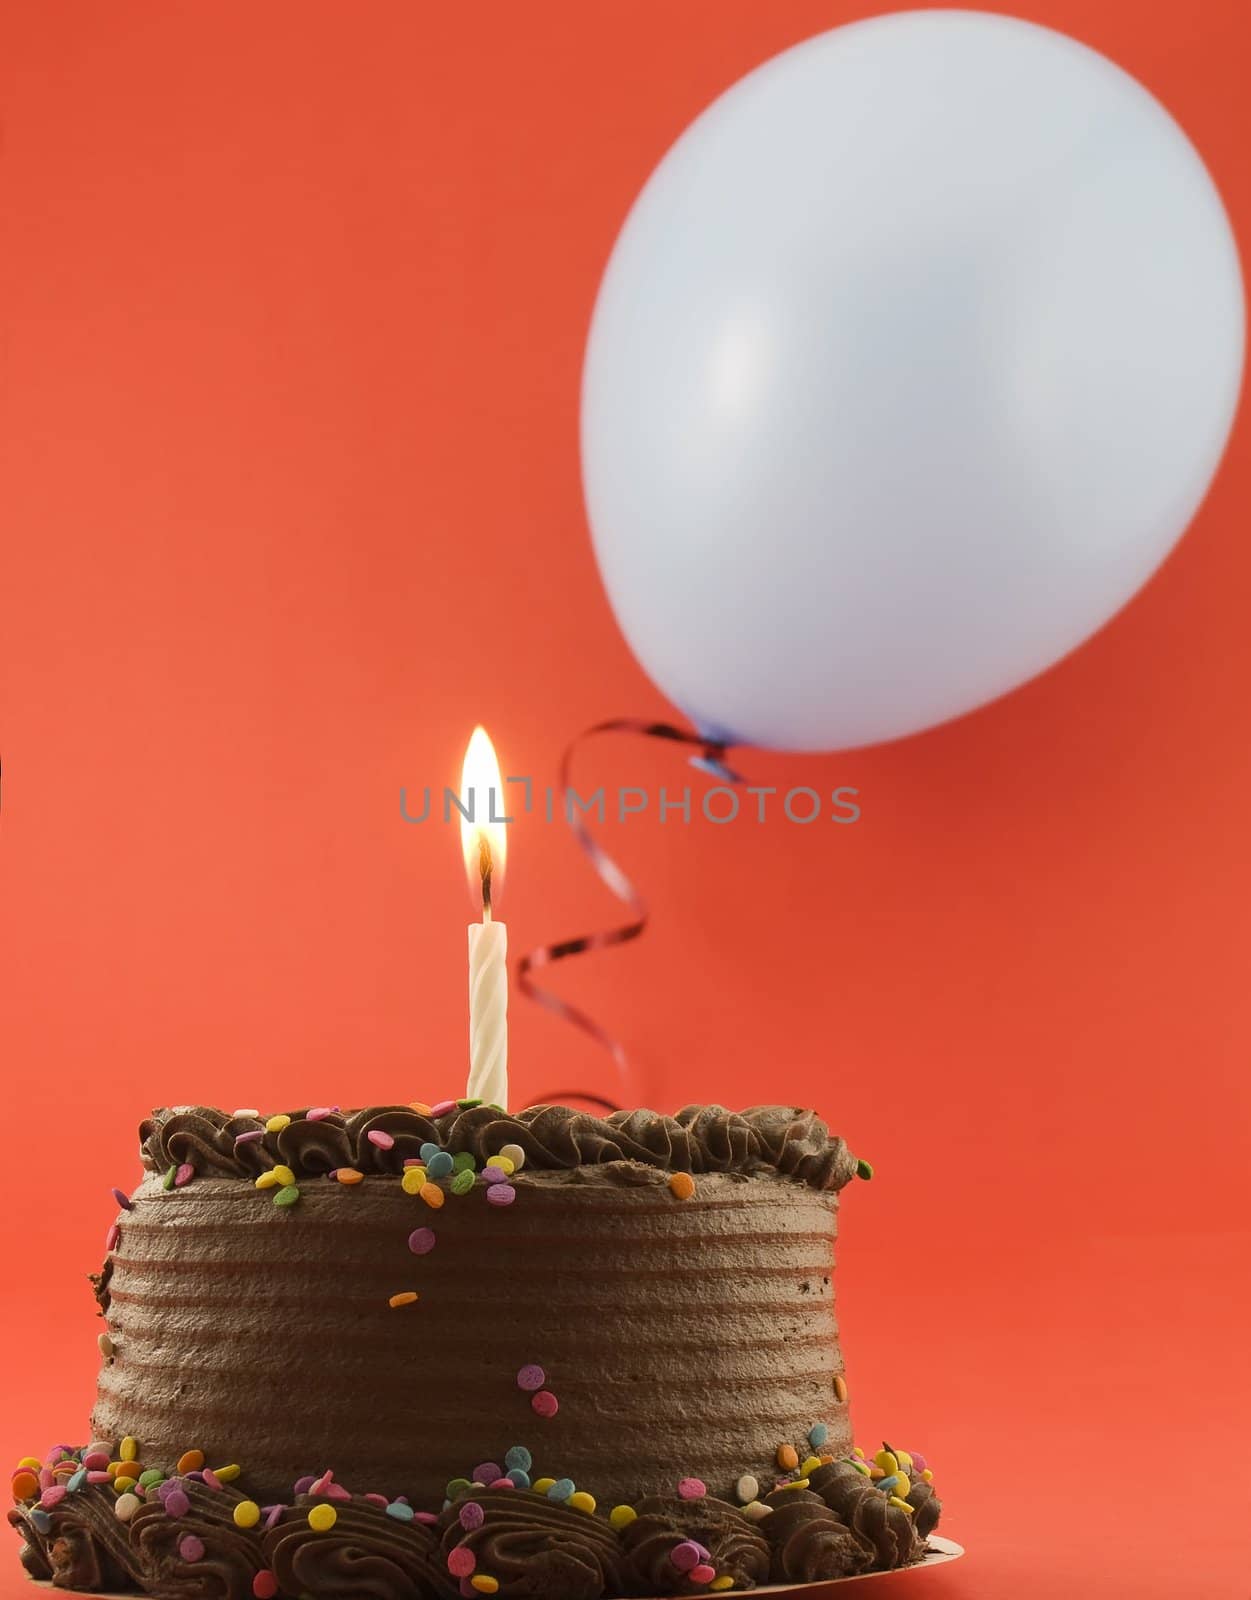 Chocolate cake with candle and balloon in the background